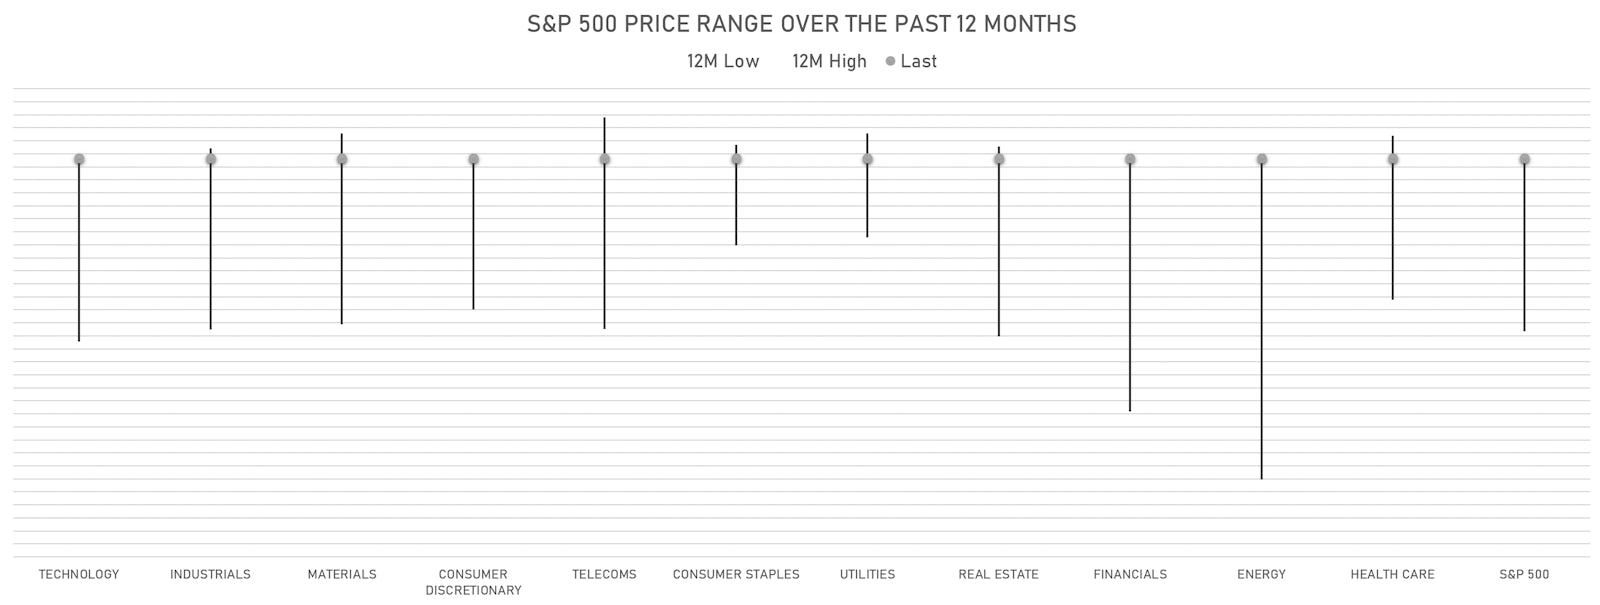 Range In S&P 500 Prices Over The Past 12 Months | Sources: ϕpost, Refinitiv data